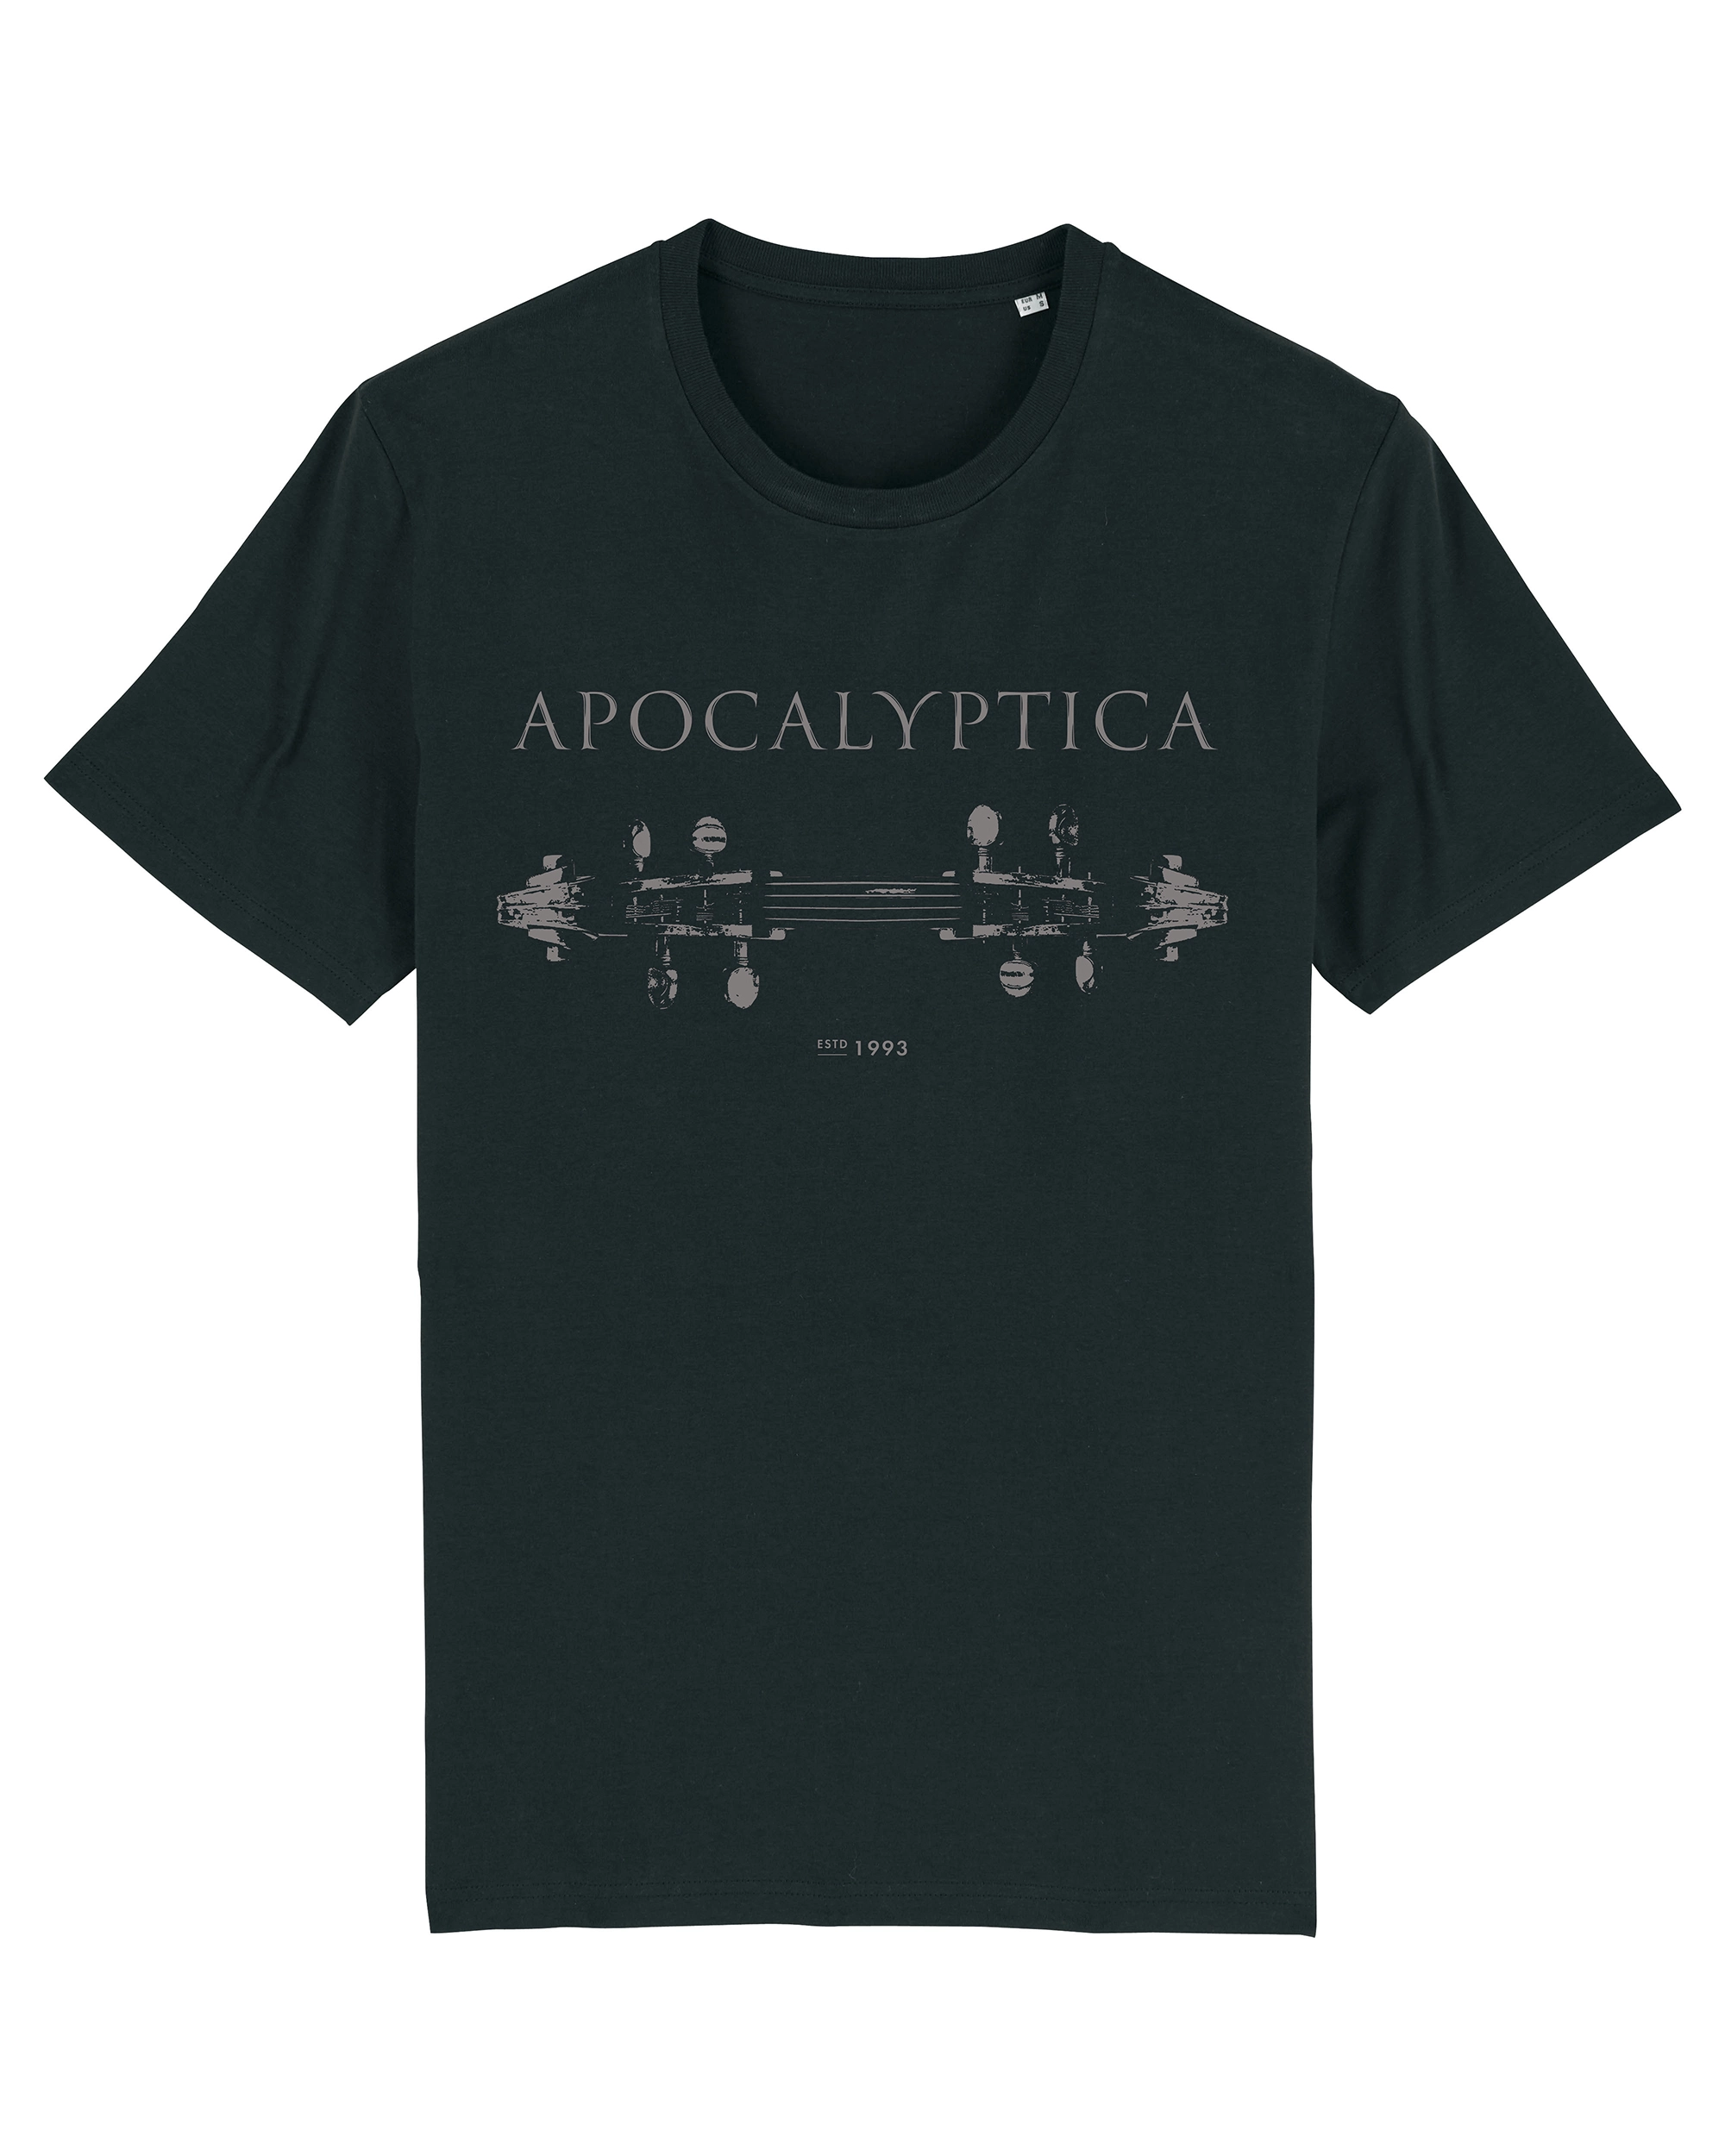 APOCALYPTICA - Mirrored [T-SHIRT]